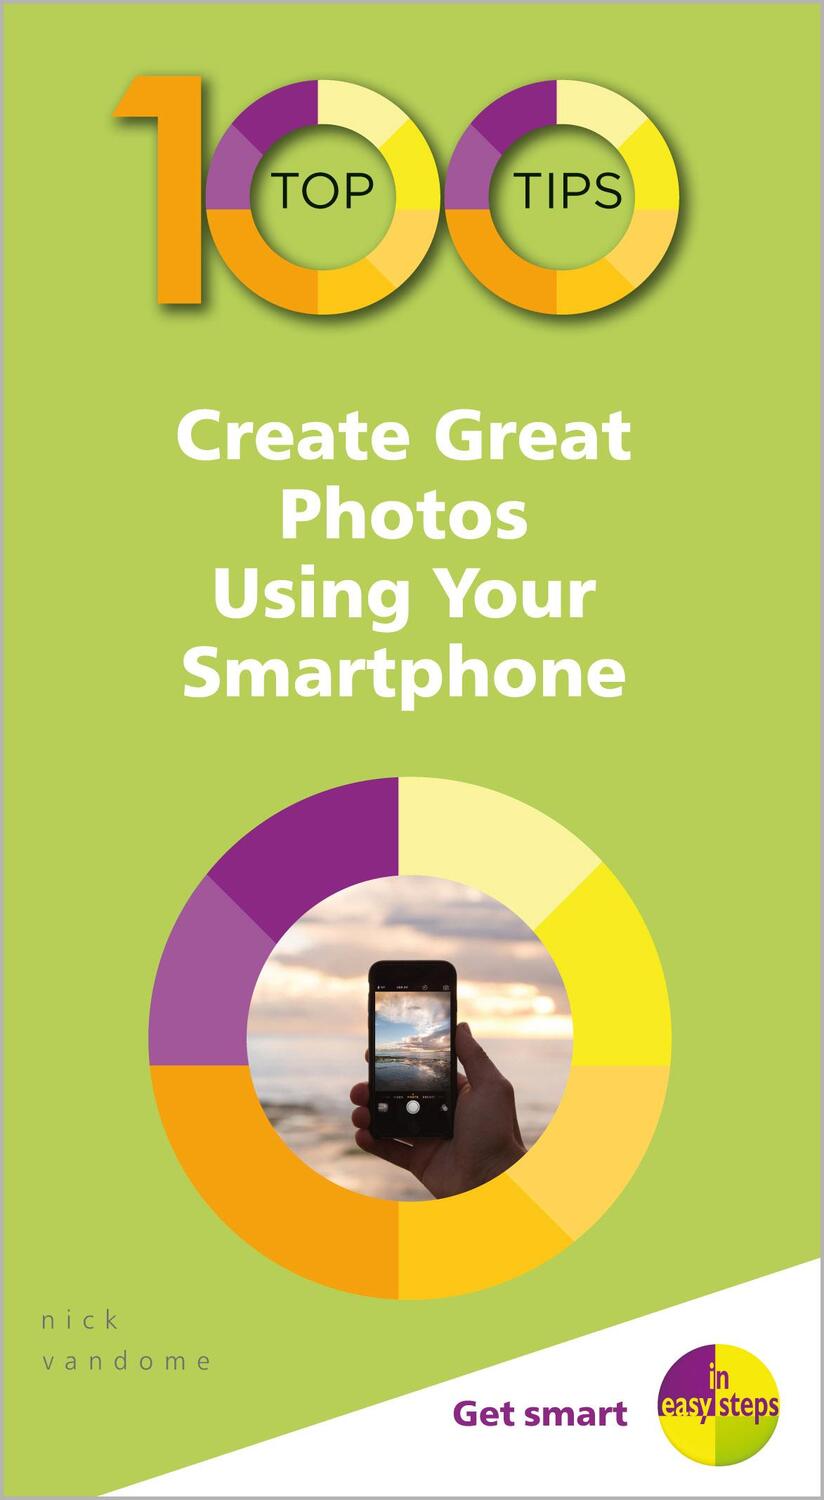 Cover: 9781840788686 | 100 Top Tips - Create Great Photos Using Your Smartphone | Vandome